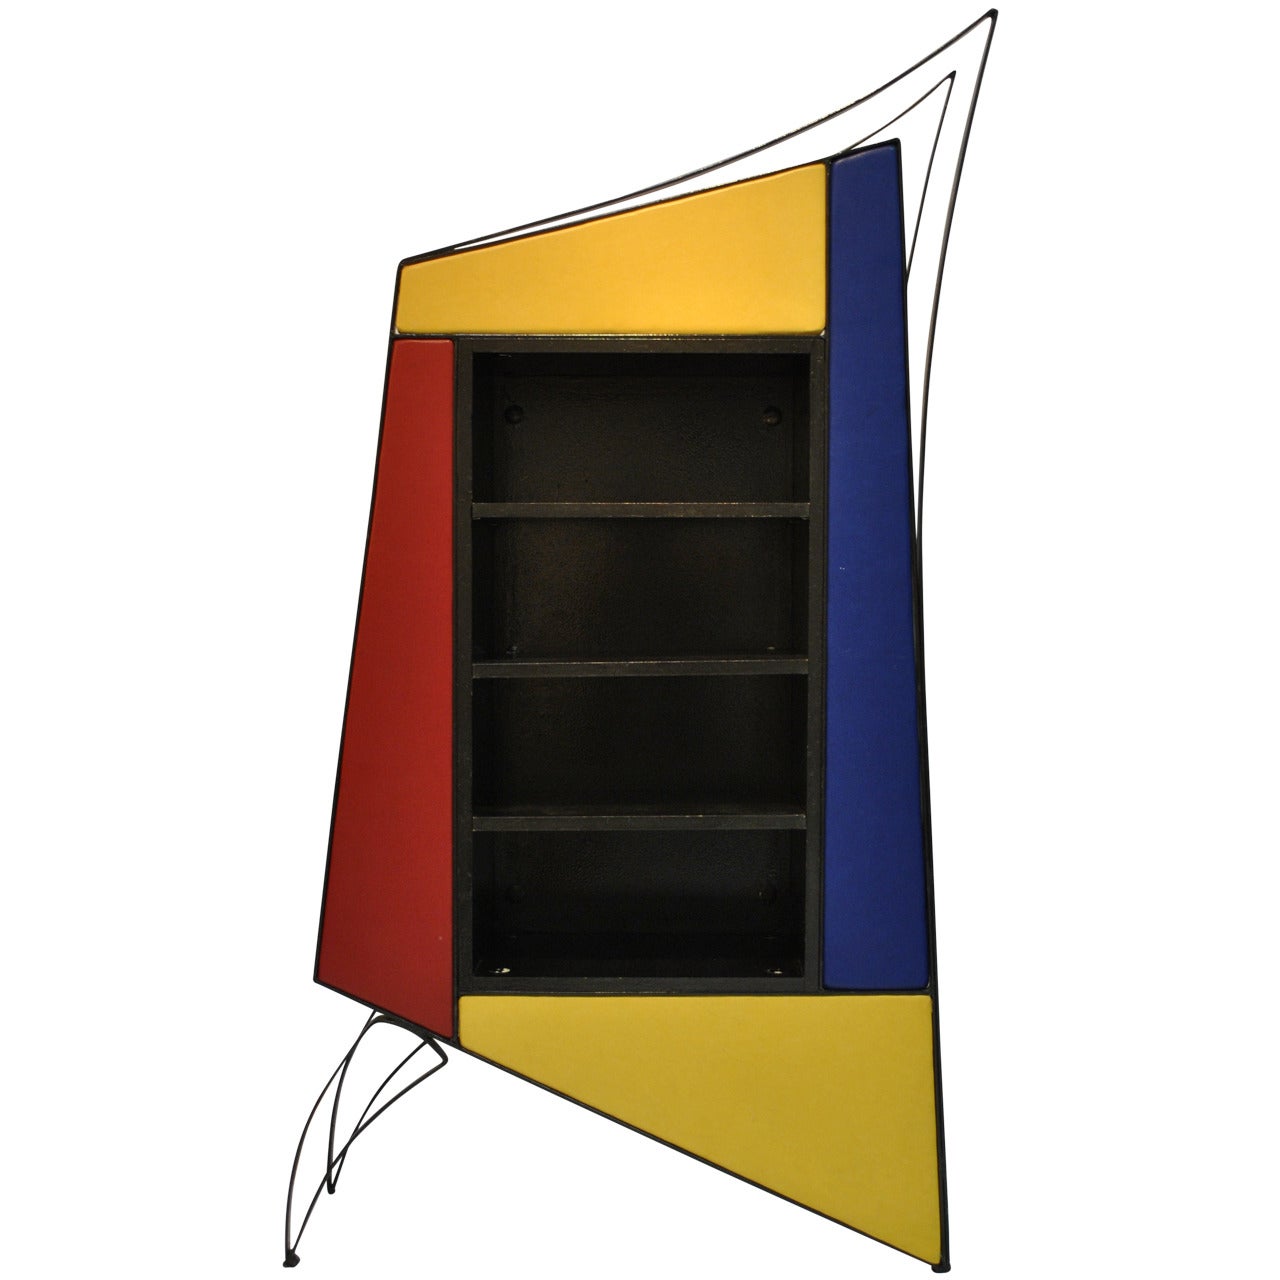 One-of-a-Kind Architectural Display Cabinet by Cyrille Varet, 1994